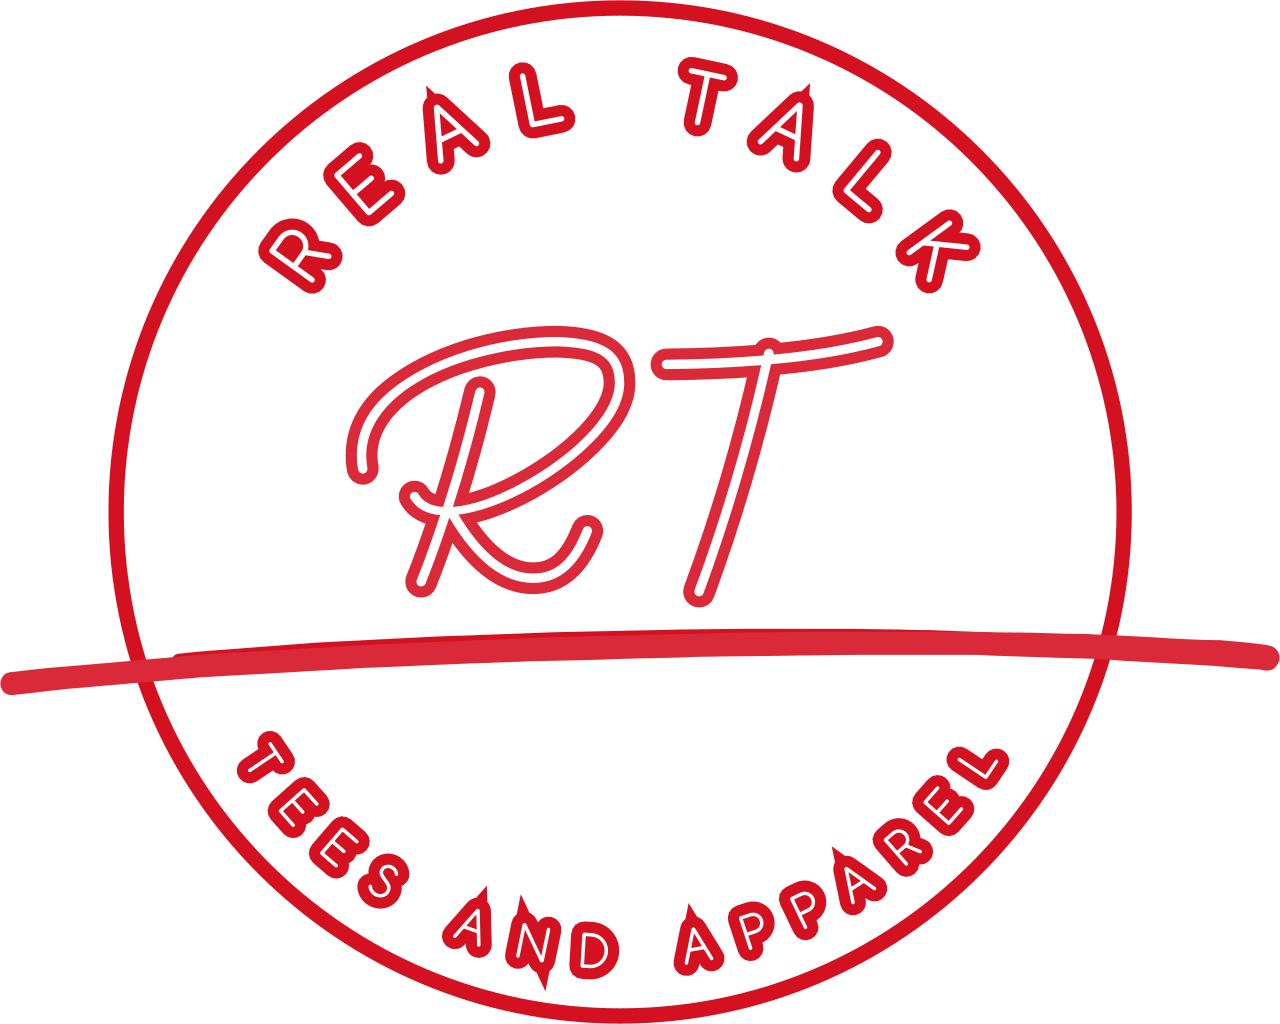 Real Talk Tees and Apparel's web page